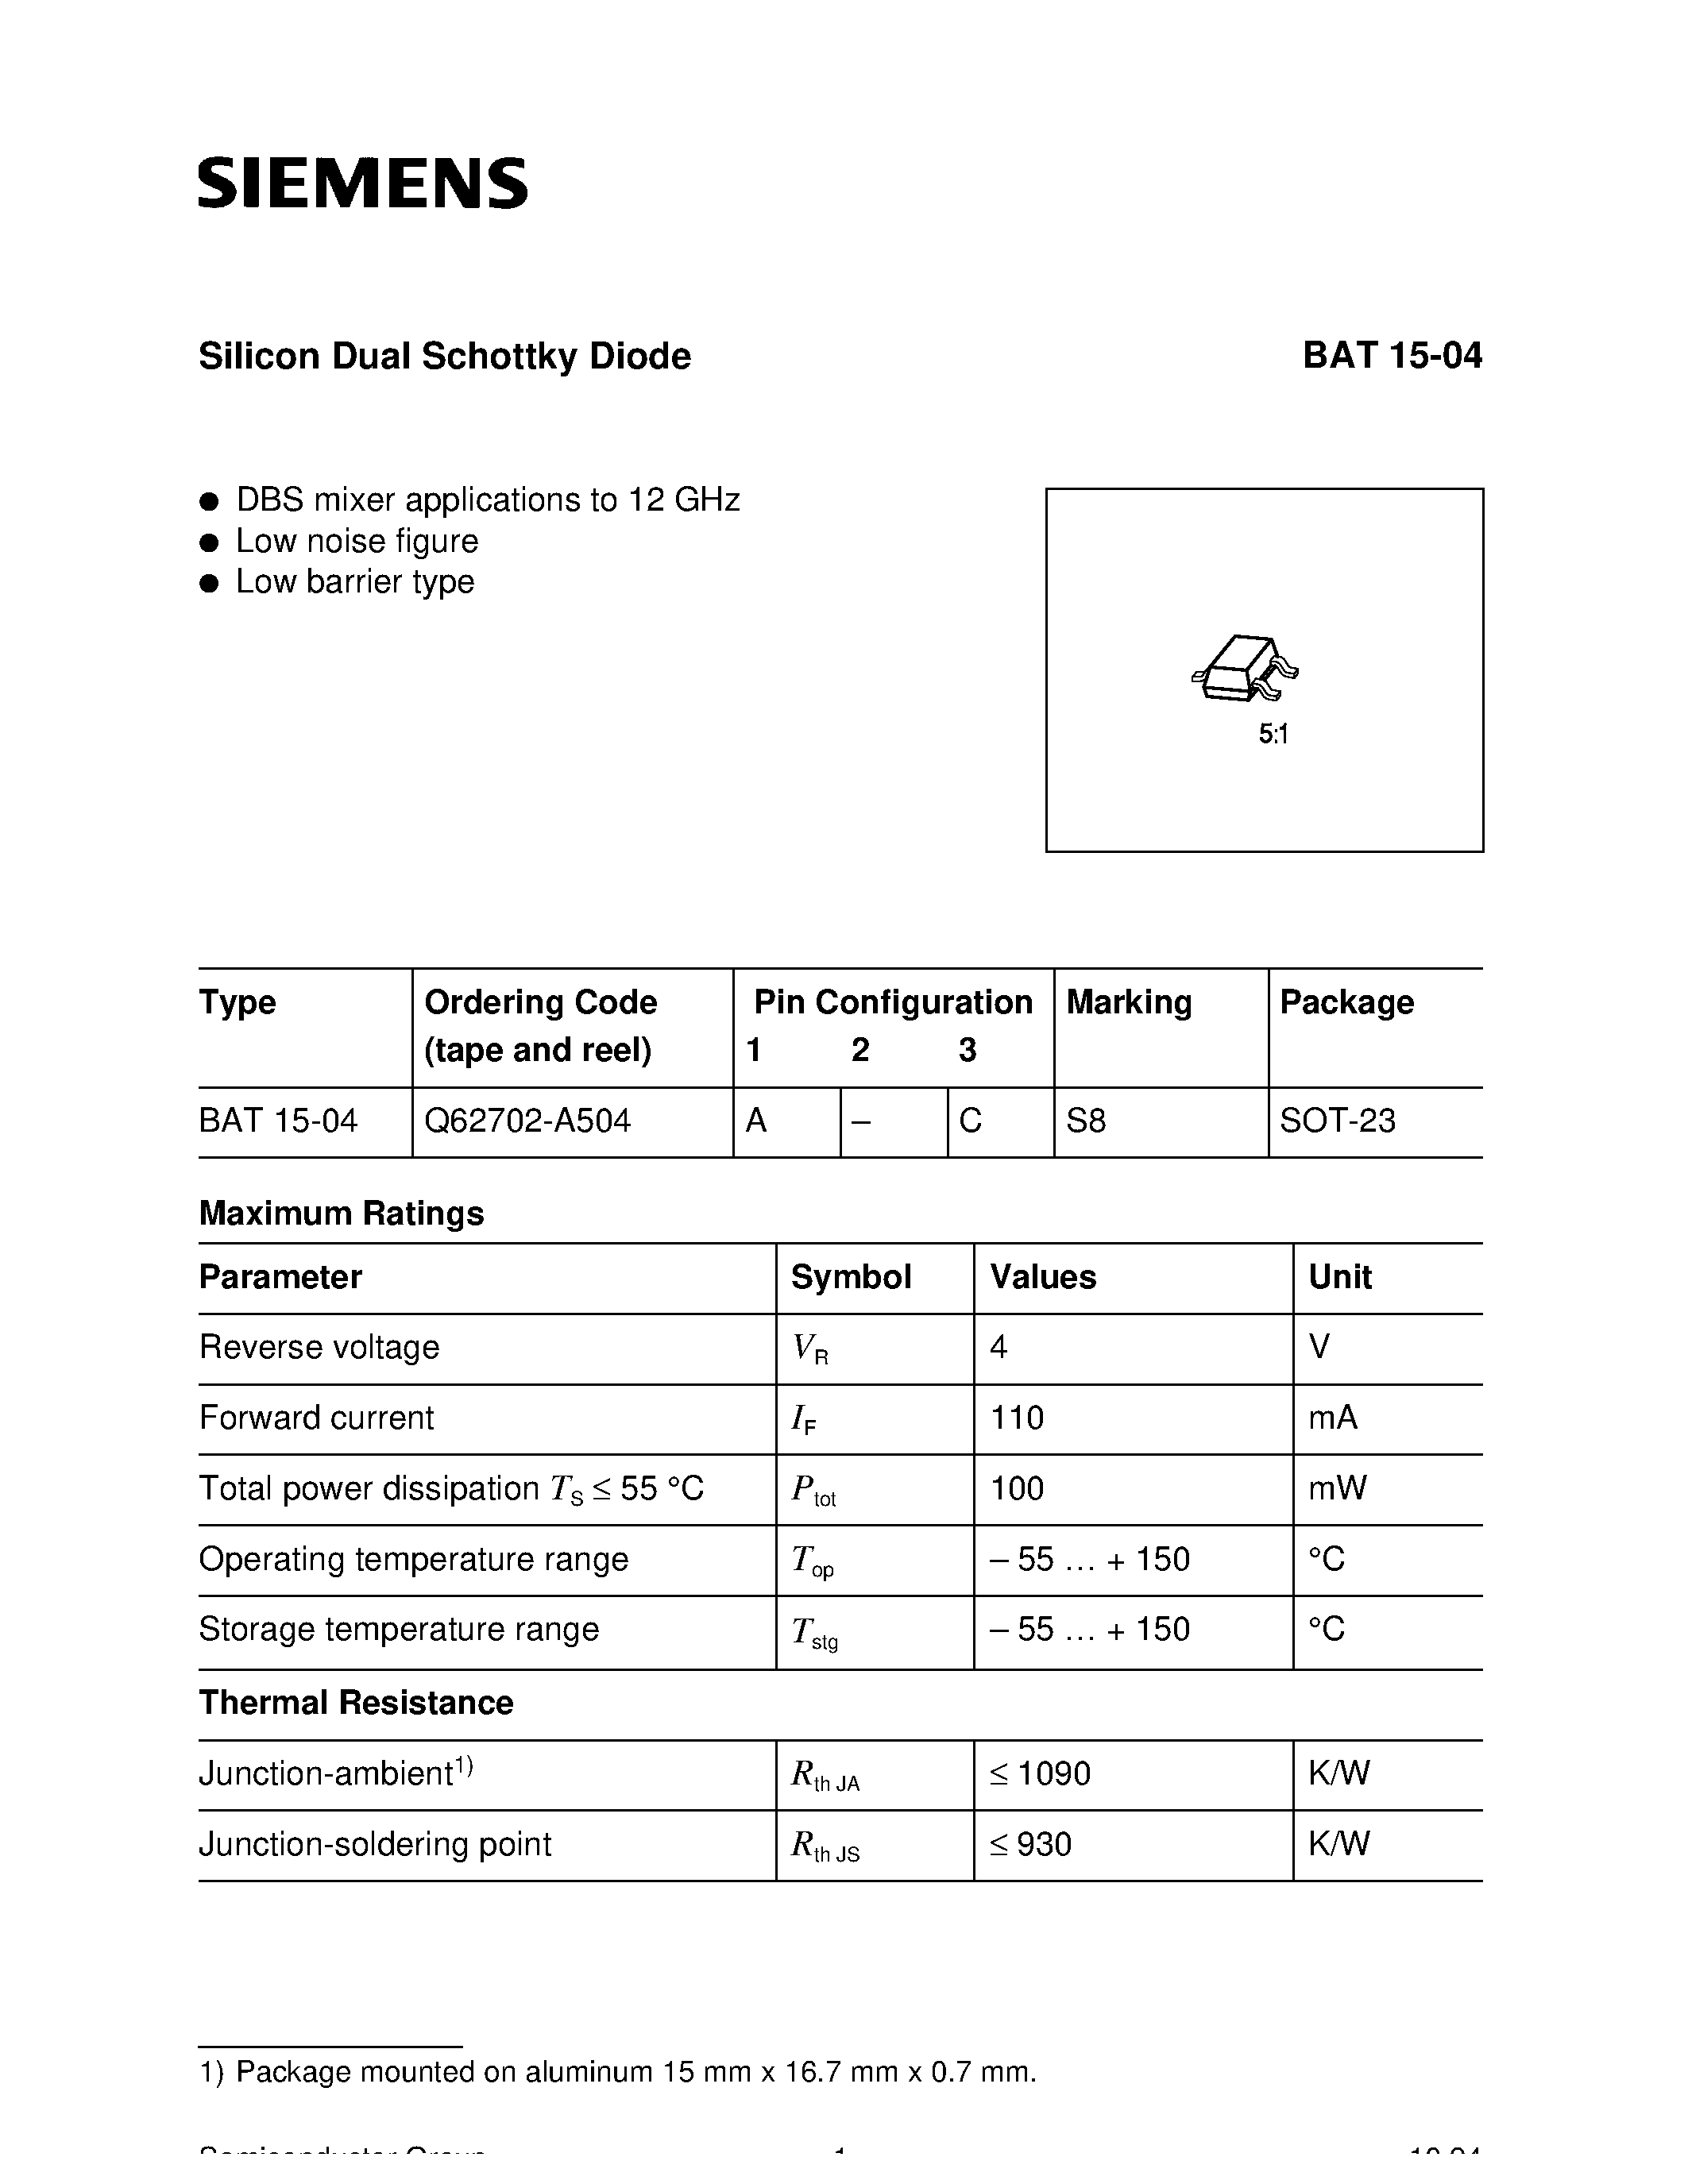 Даташит BAT15-04 - Silicon Dual Schottky Diode (DBS mixer applications to 12 GHz Low noise figure Low barrier type) страница 1